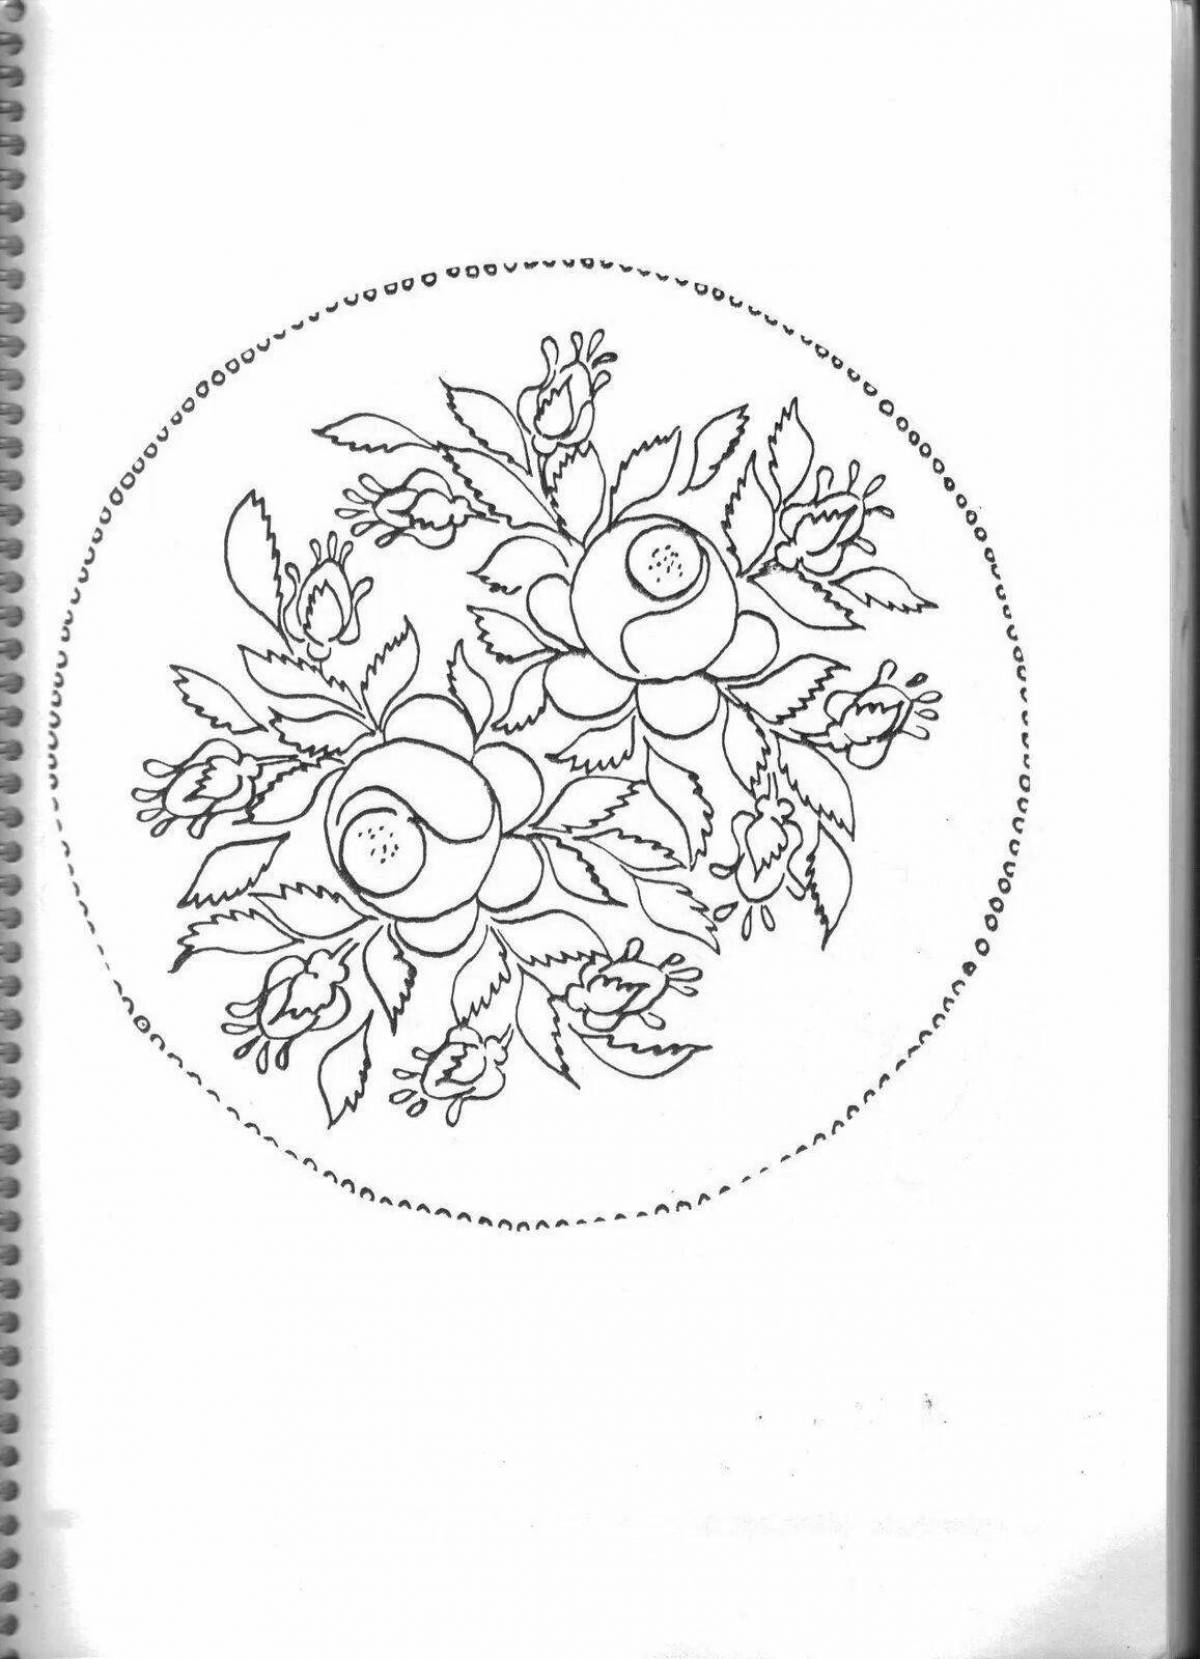 Coloring book playful tray Gzhel